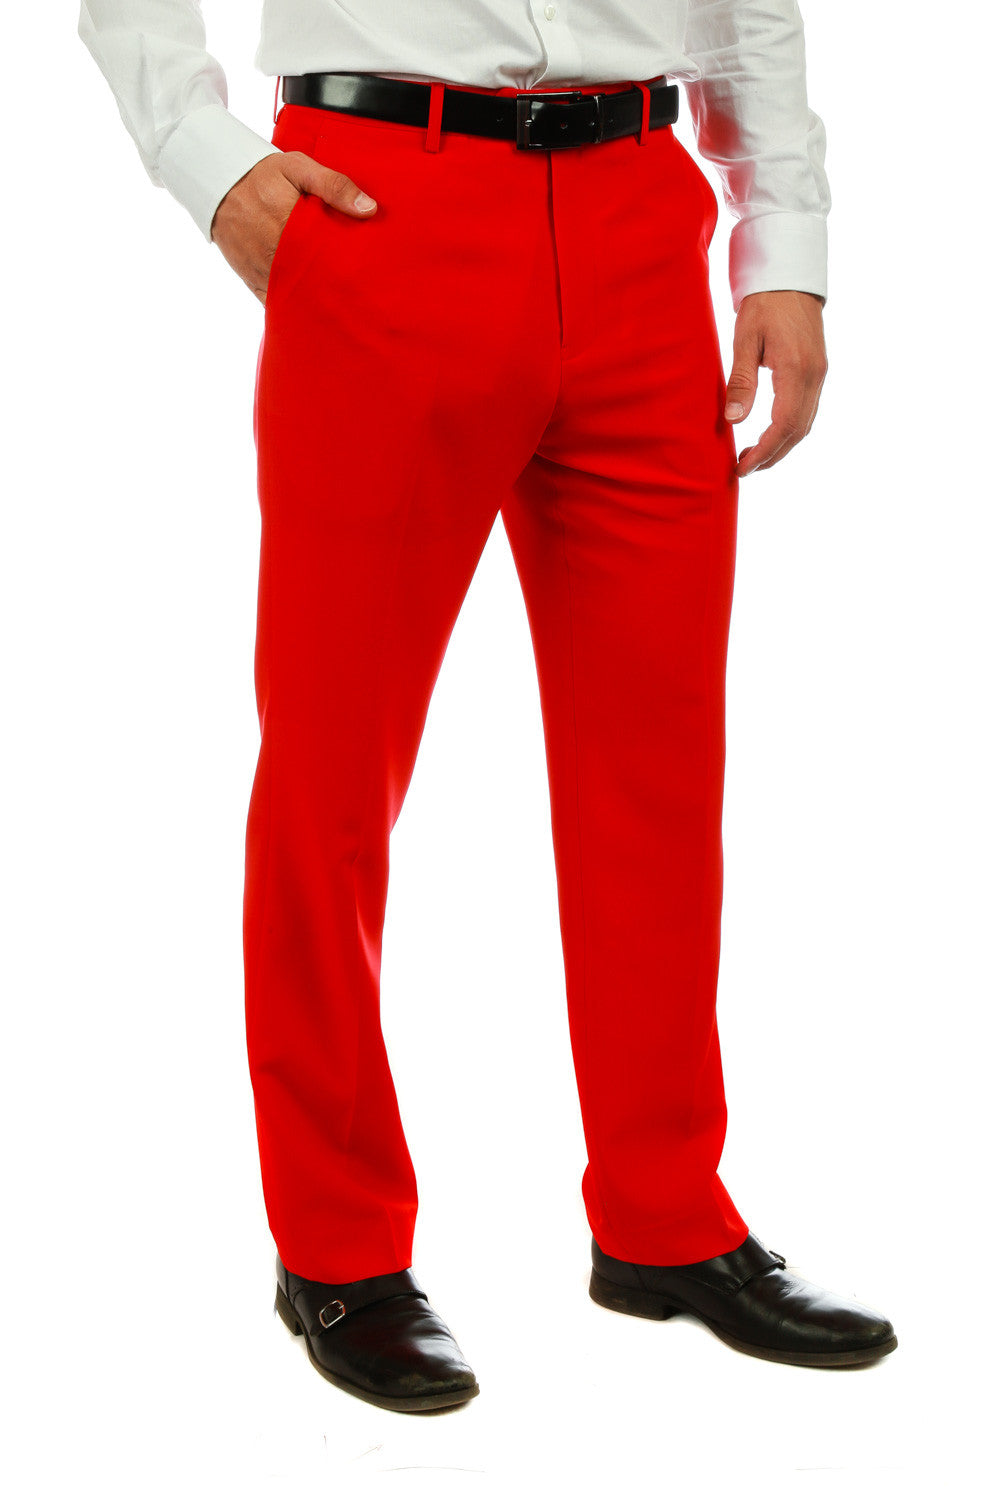 Buy BLACKBERRYS Red Mens Solid Suits  Shoppers Stop